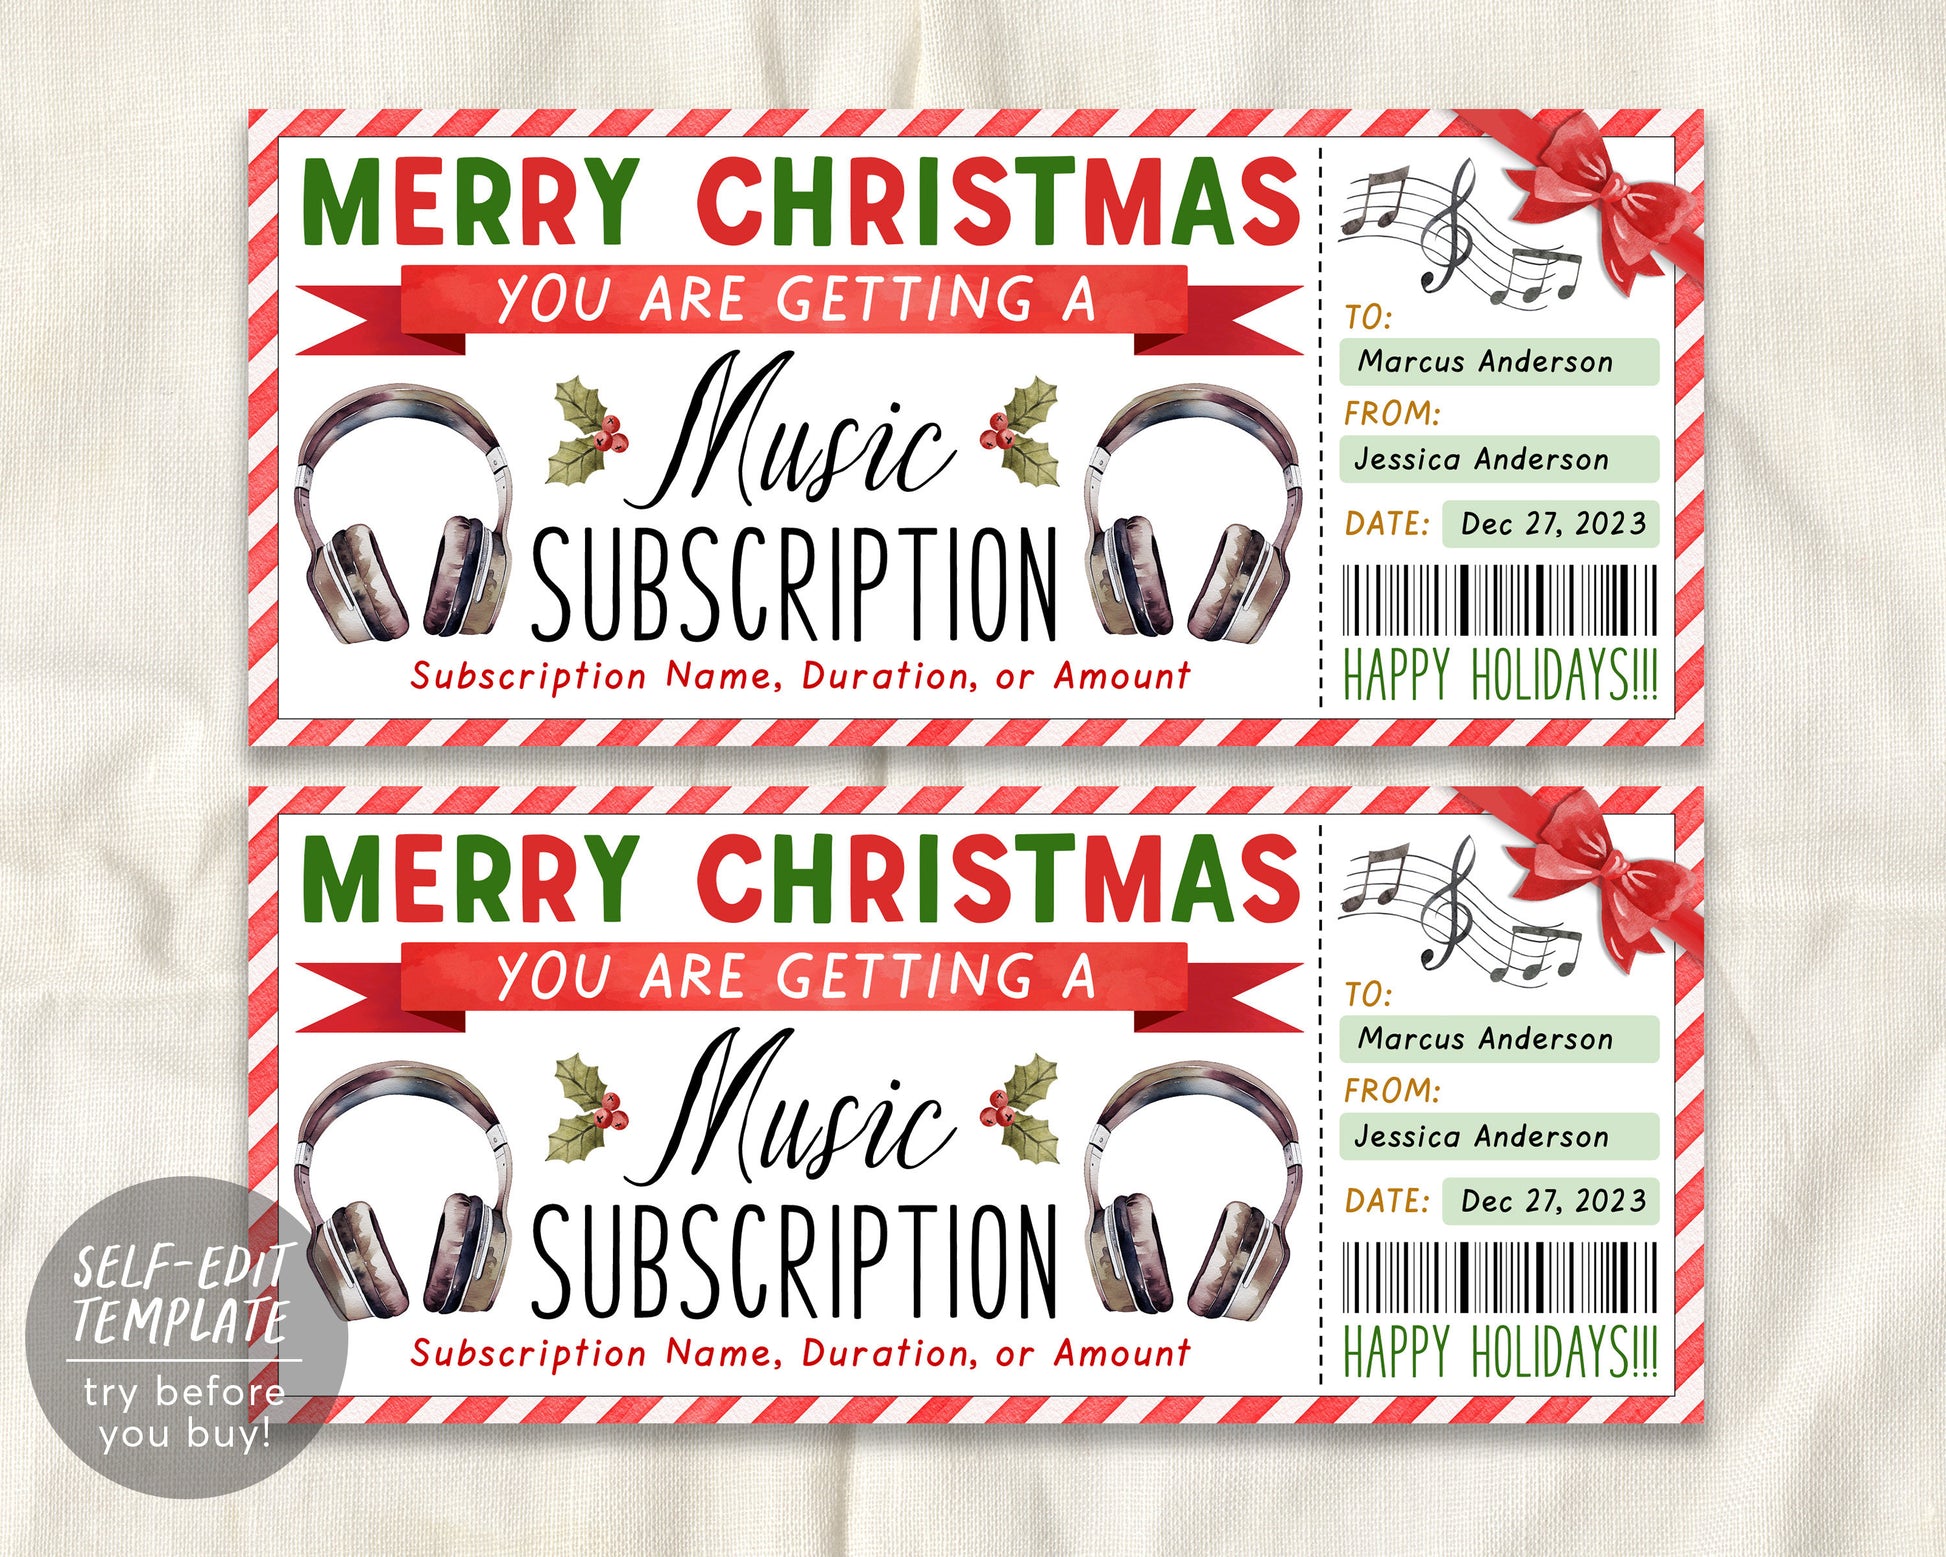 Surprise Music Streaming Subscription Gift Card Editable Template